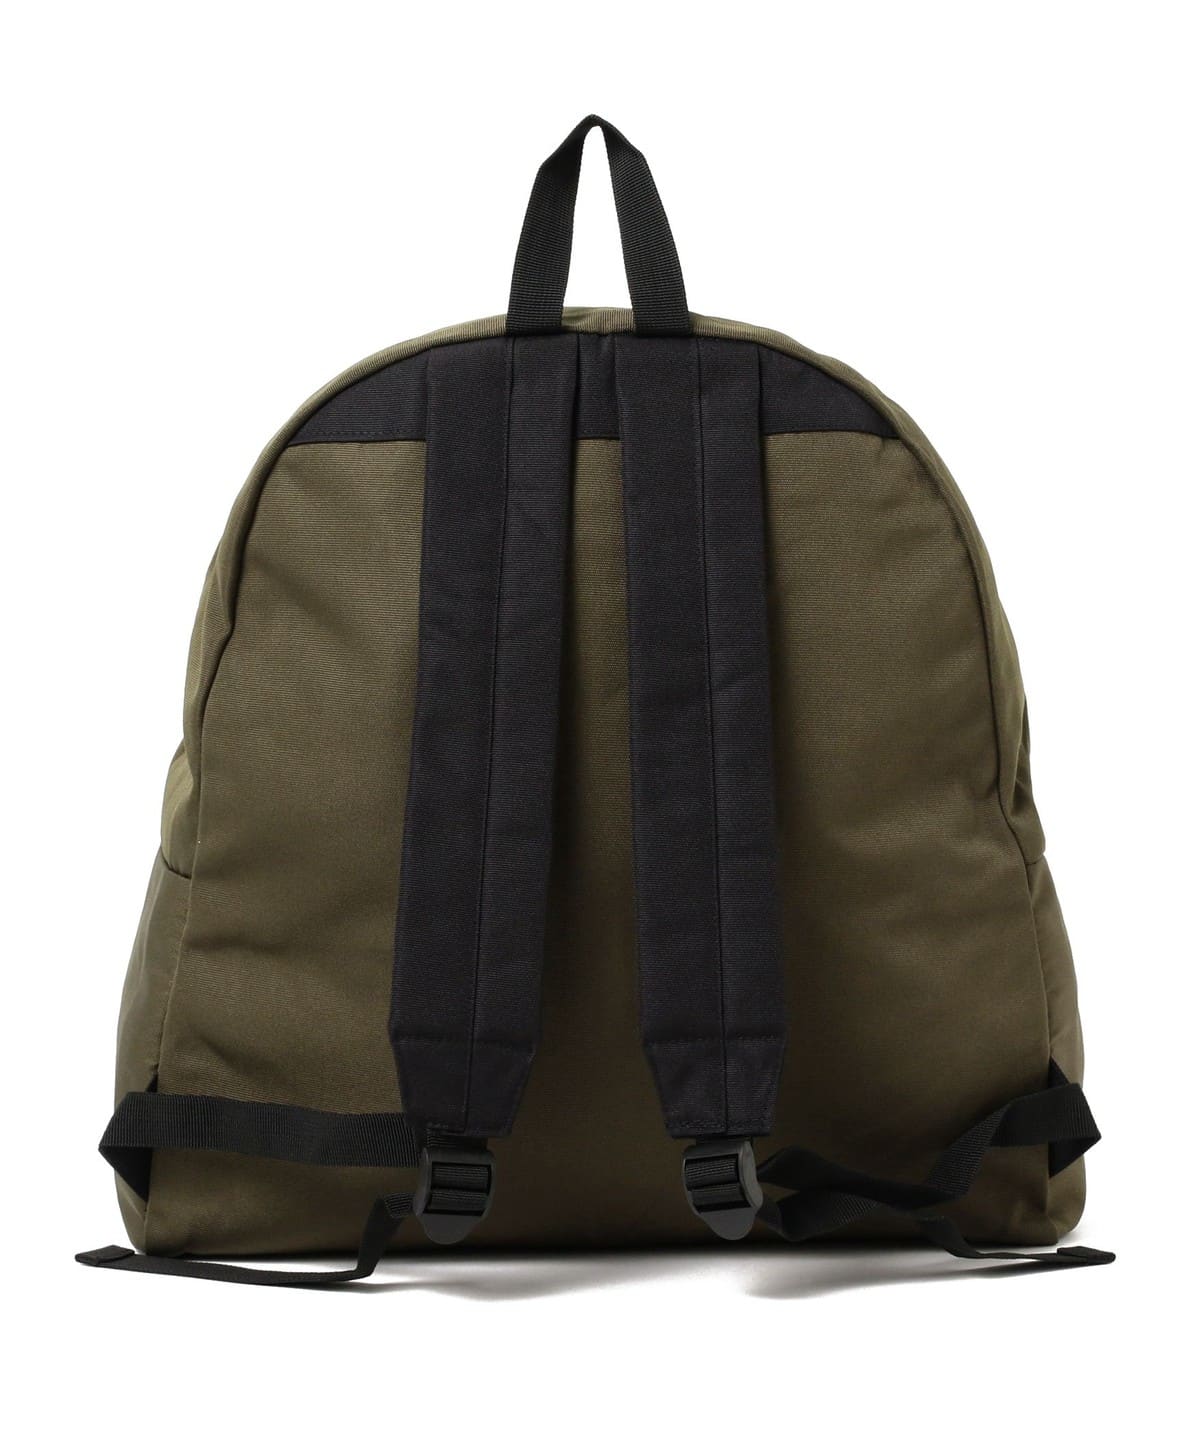 B:MING by BEAMS B:MING by BEAMS PACKING / BACKPACK mail 